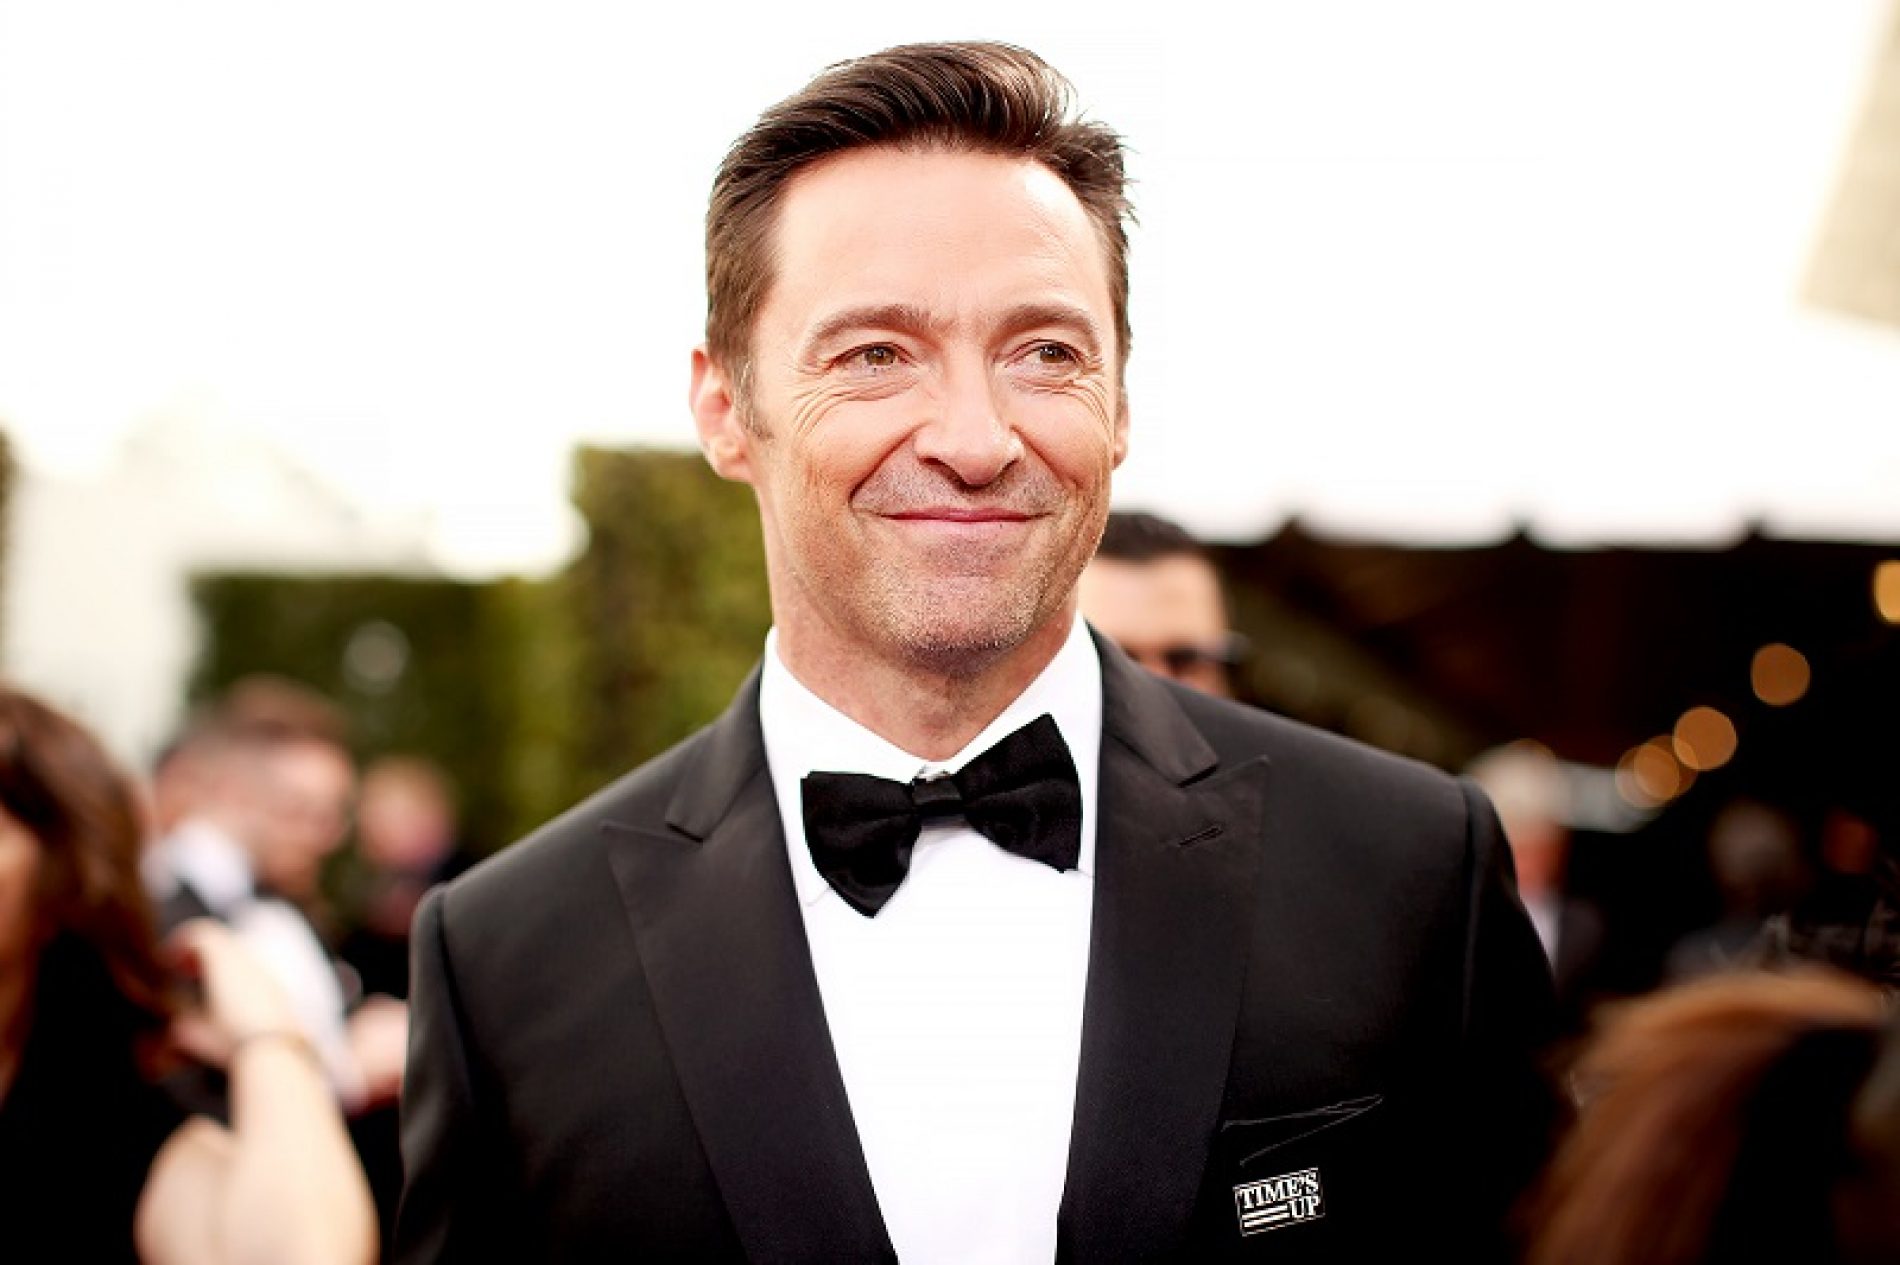 Hugh Jackman explains where the gay rumours about him may have originated from